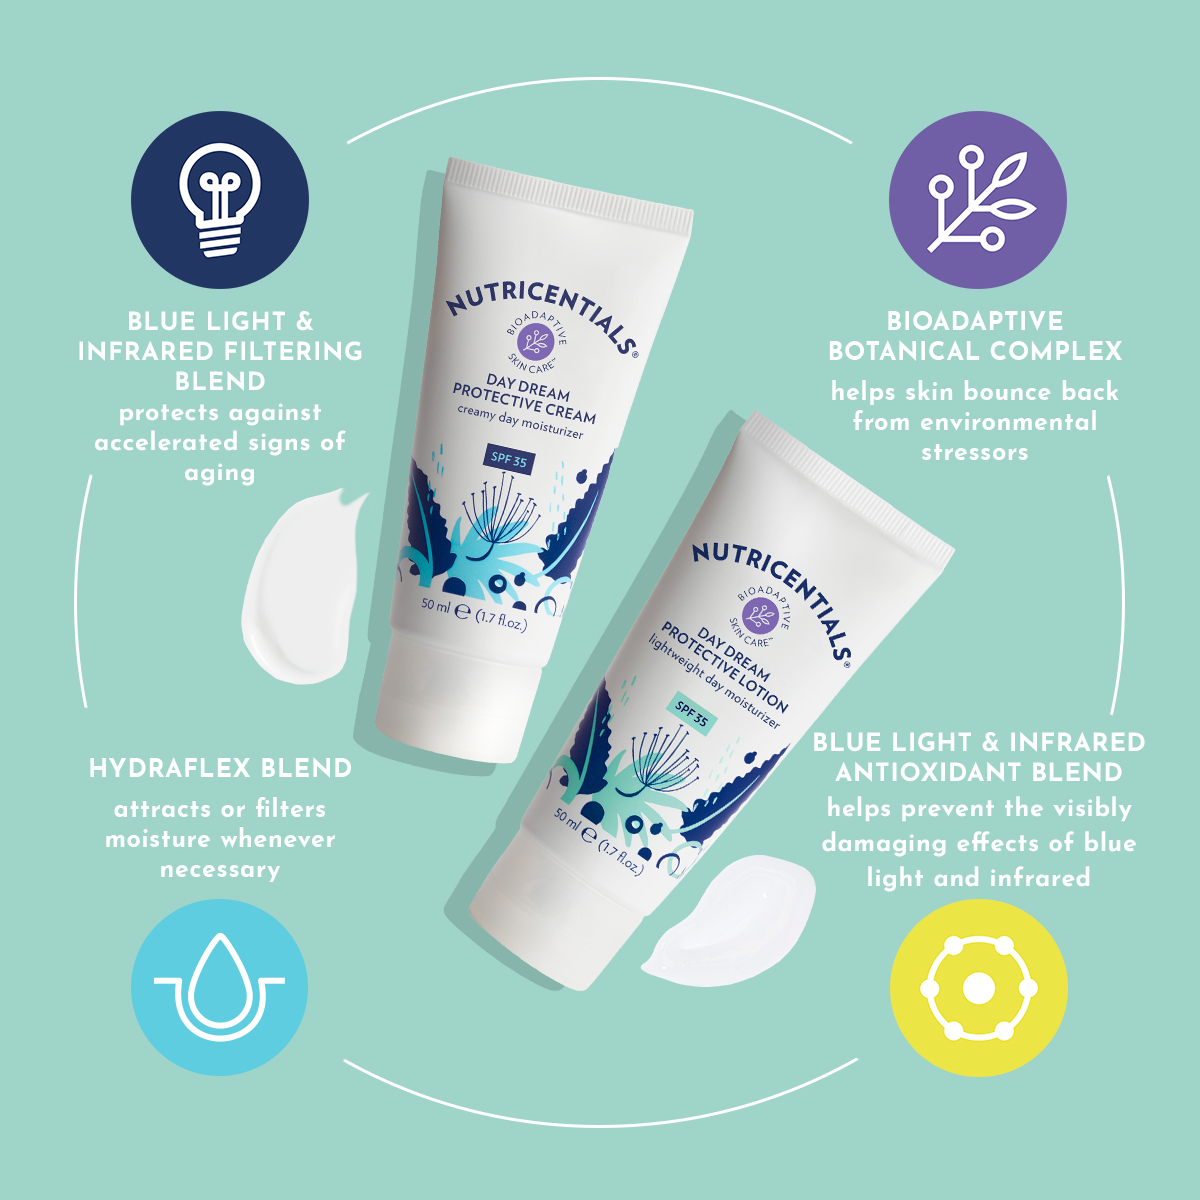 Nutricentials Bioadaptive Skin Care helps skin adapt to environments and recover from environmental stressors